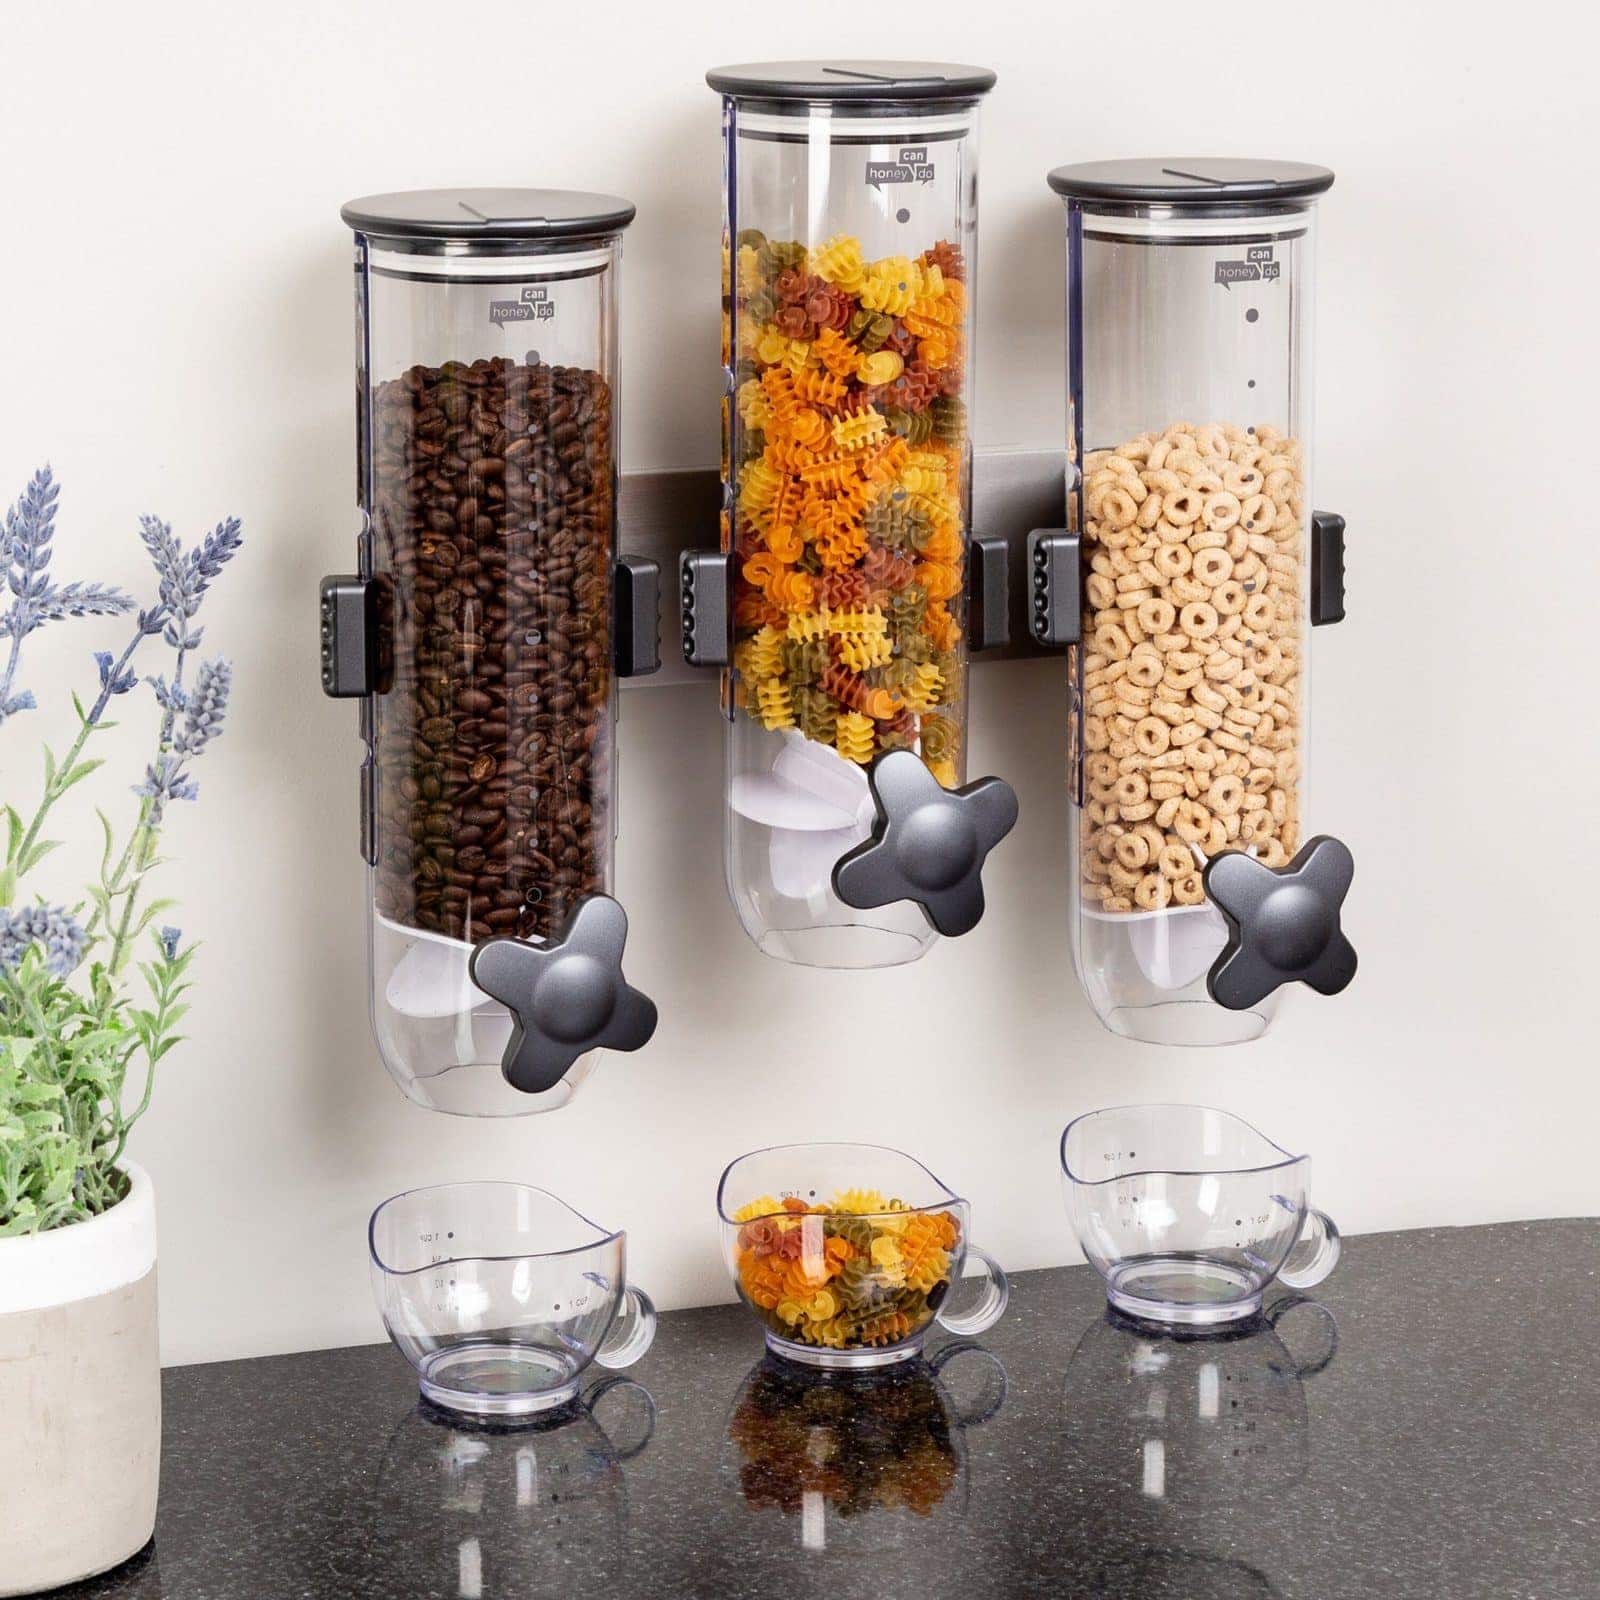 Mount Cereal Dispensers to the Wall